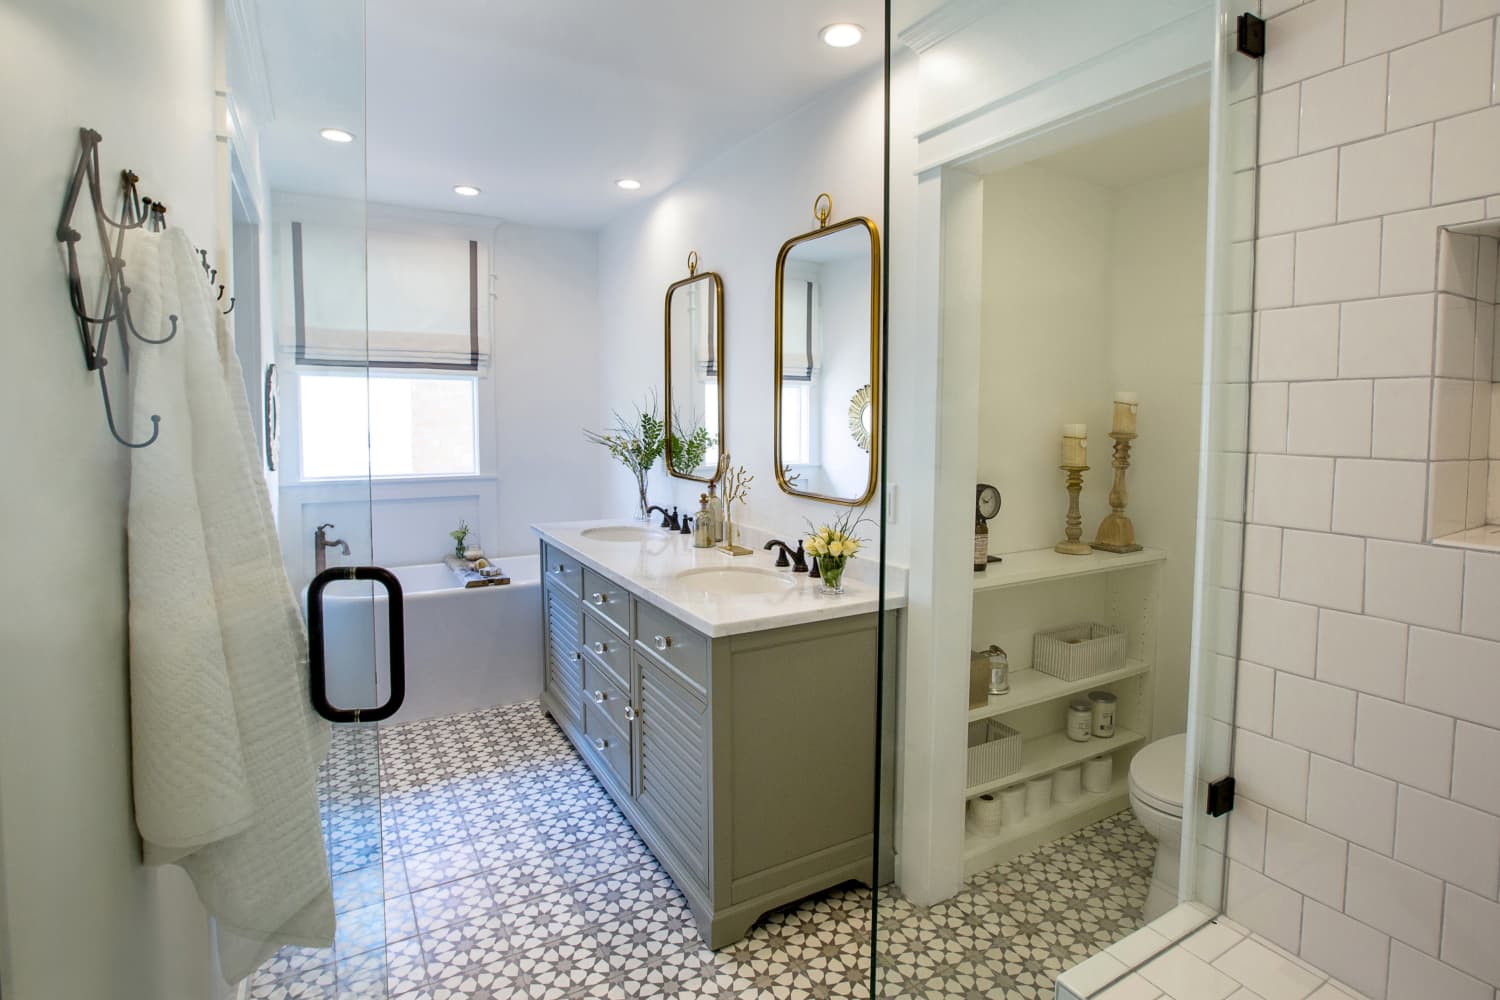 A Husband and Wife’s “Happy Medium” Small Space Bathroom Renovation ...